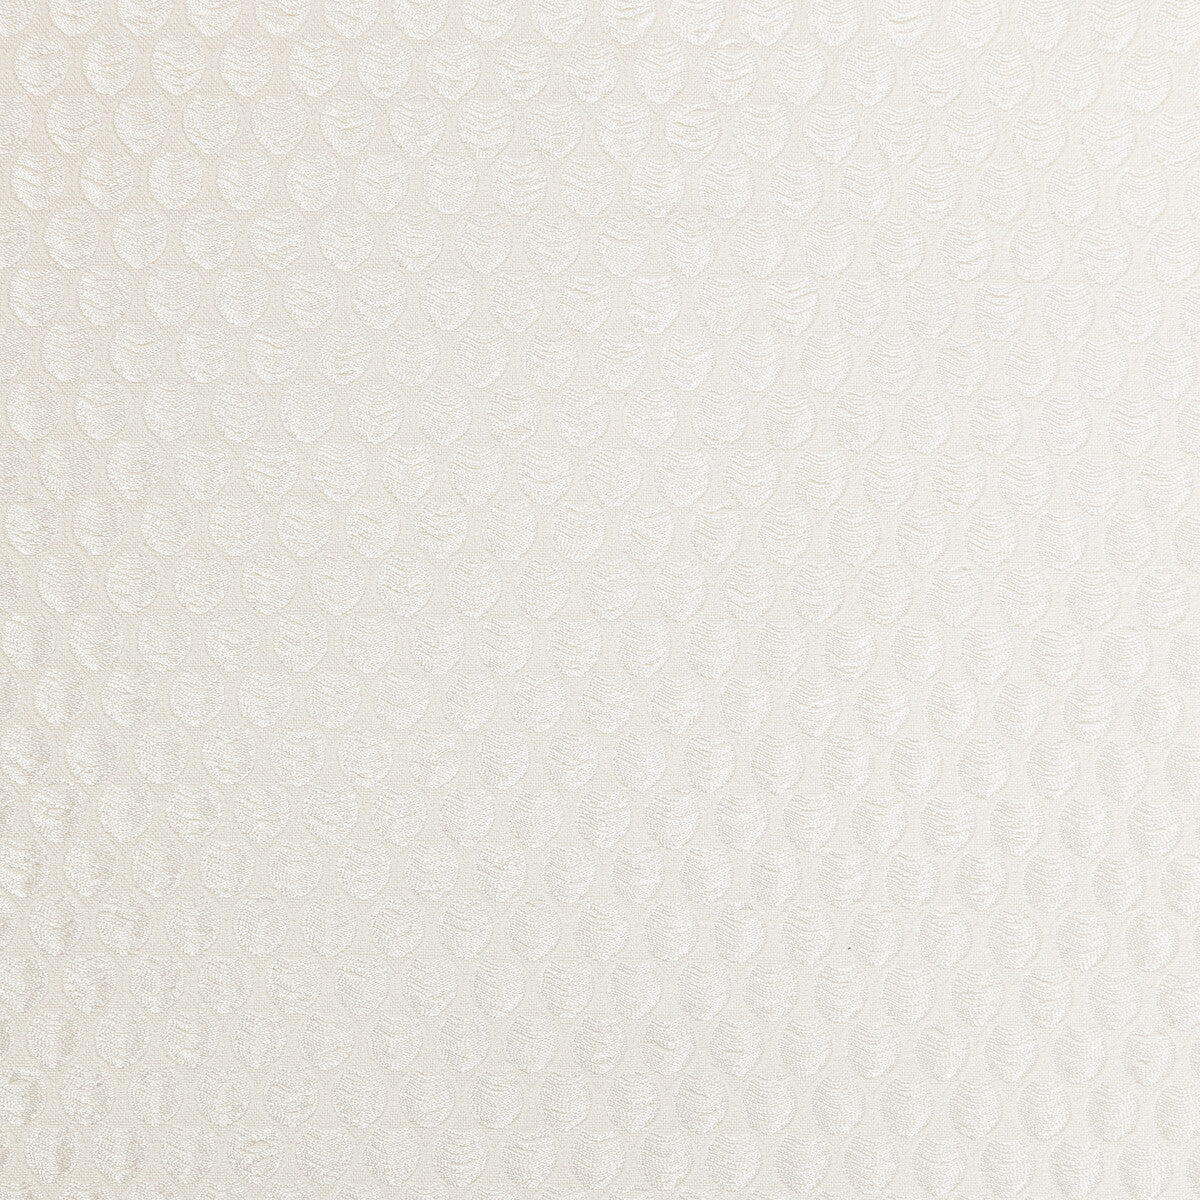 Perfect Catch fabric in pearl color - pattern 4950.1116.0 - by Kravet Couture in the Modern Luxe Silk Luster collection